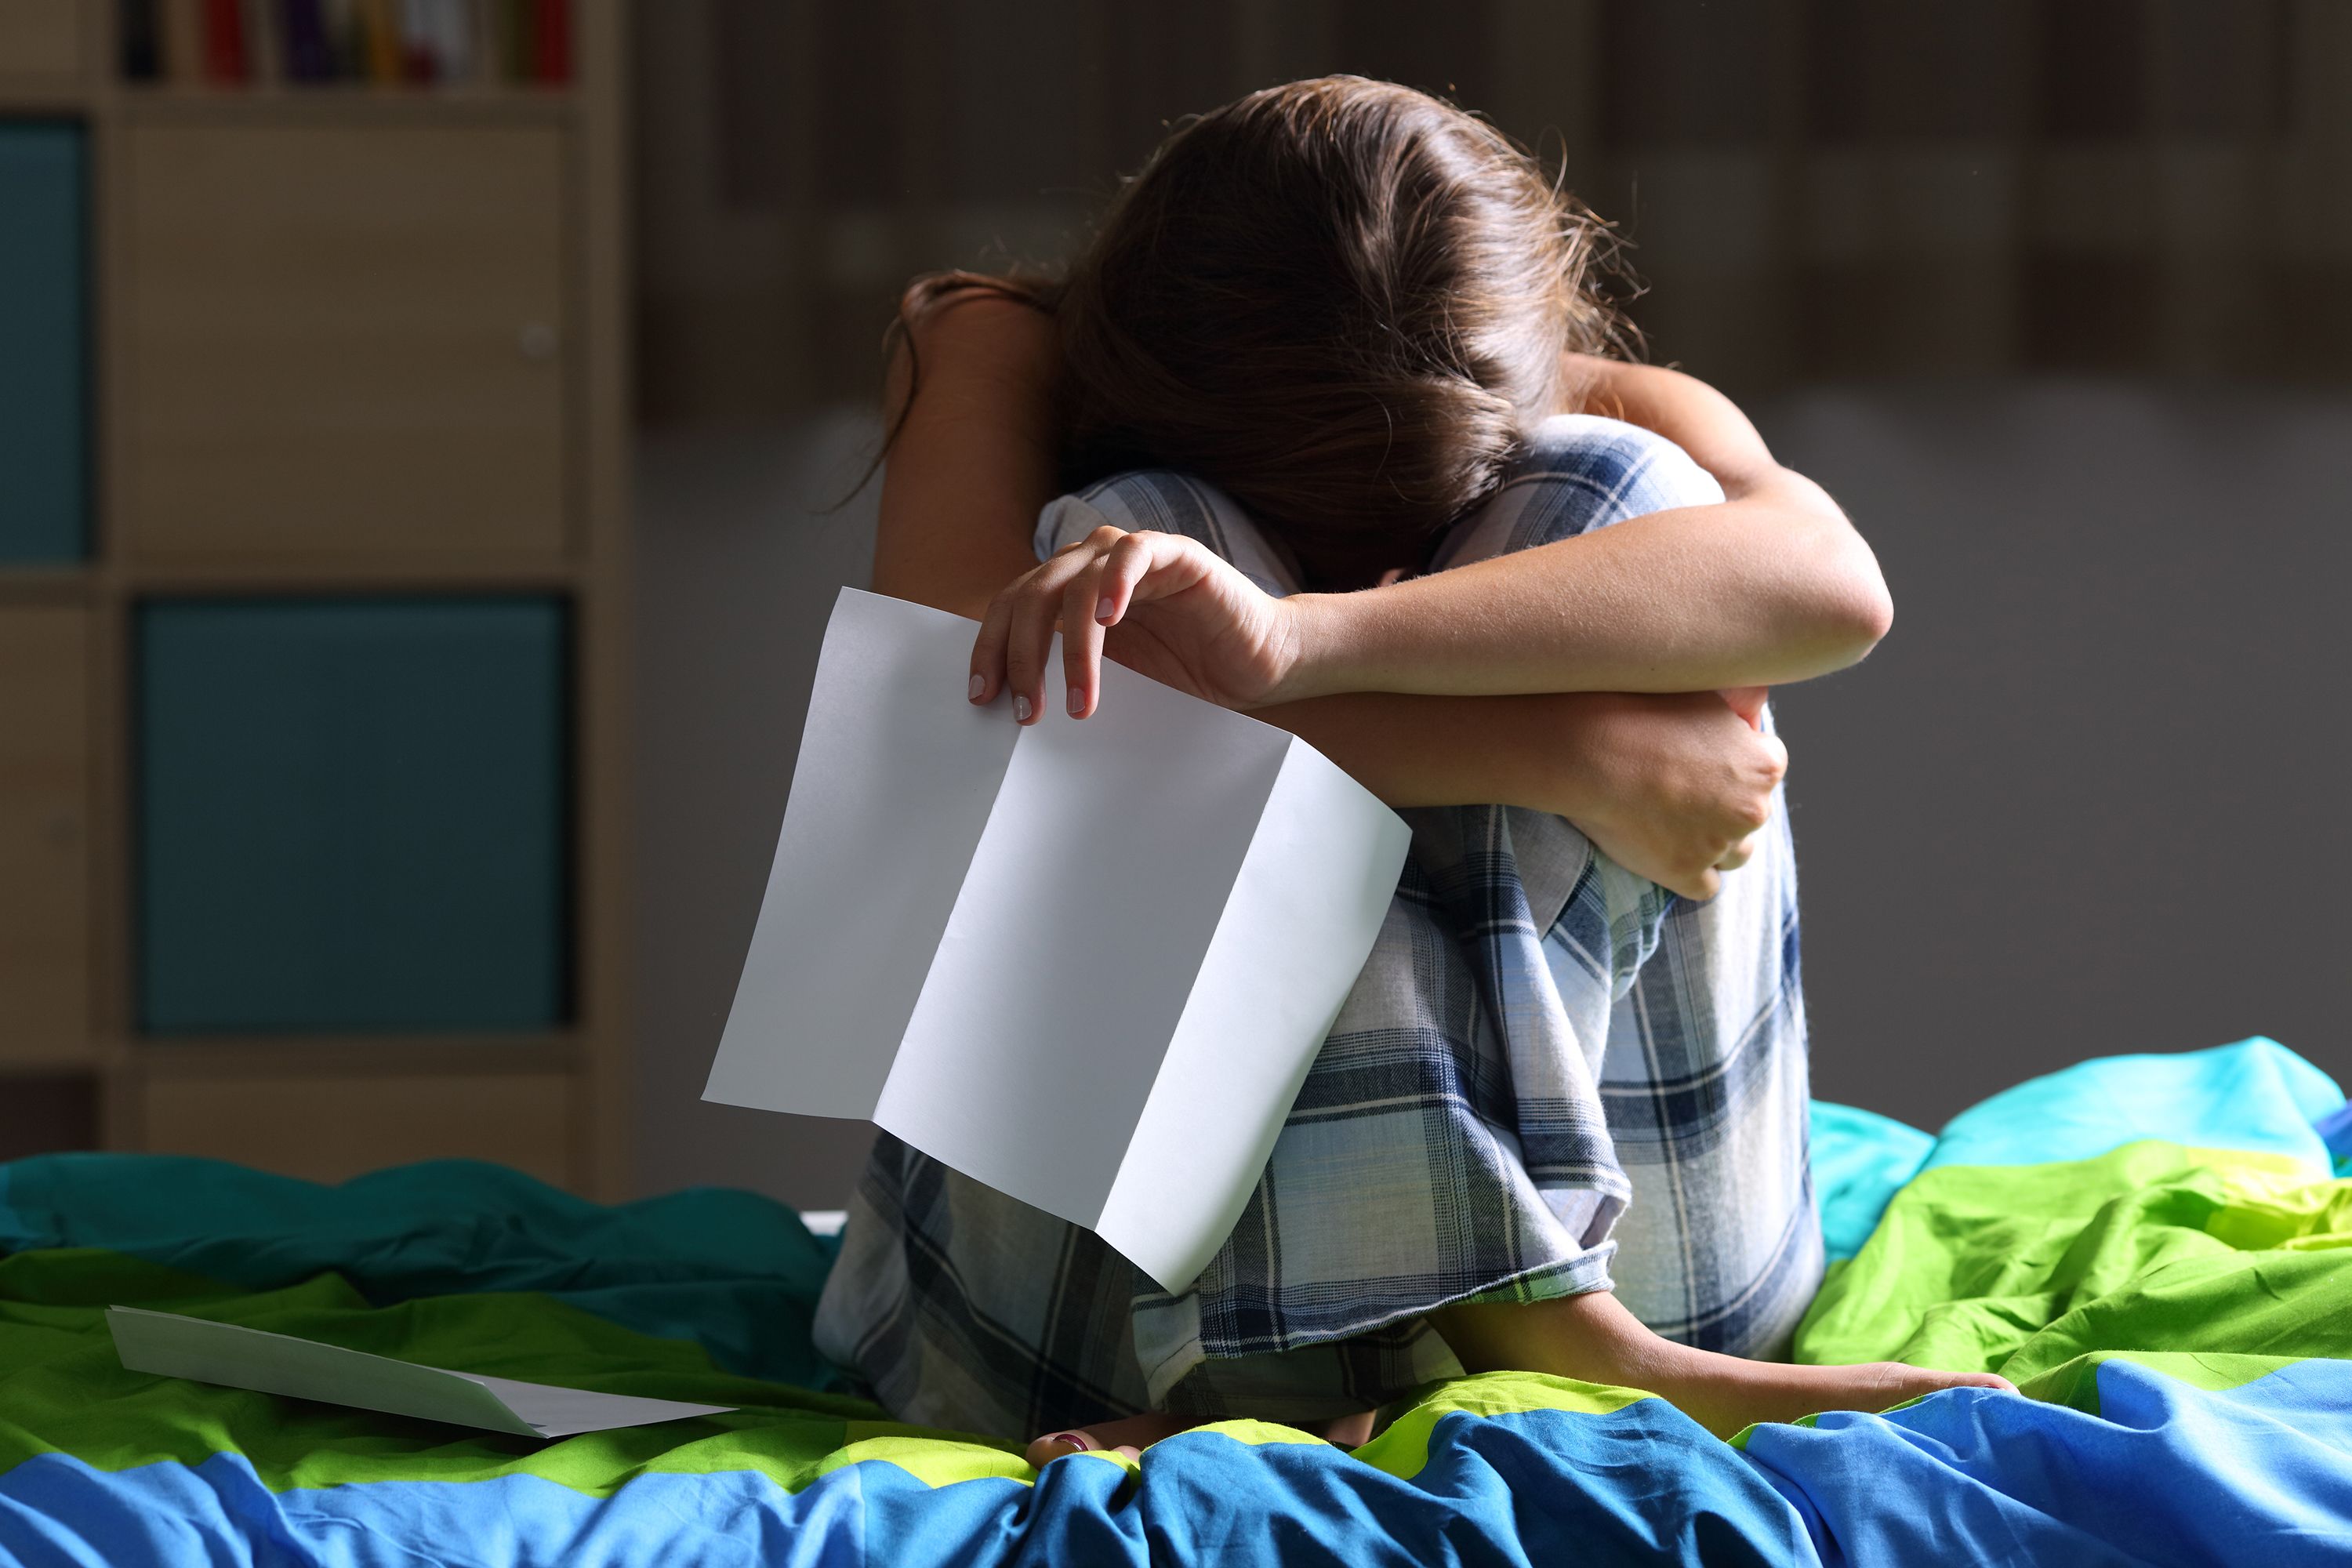 Teen Girls Report Record Levels of Sadness, Sexual Violence: CDC